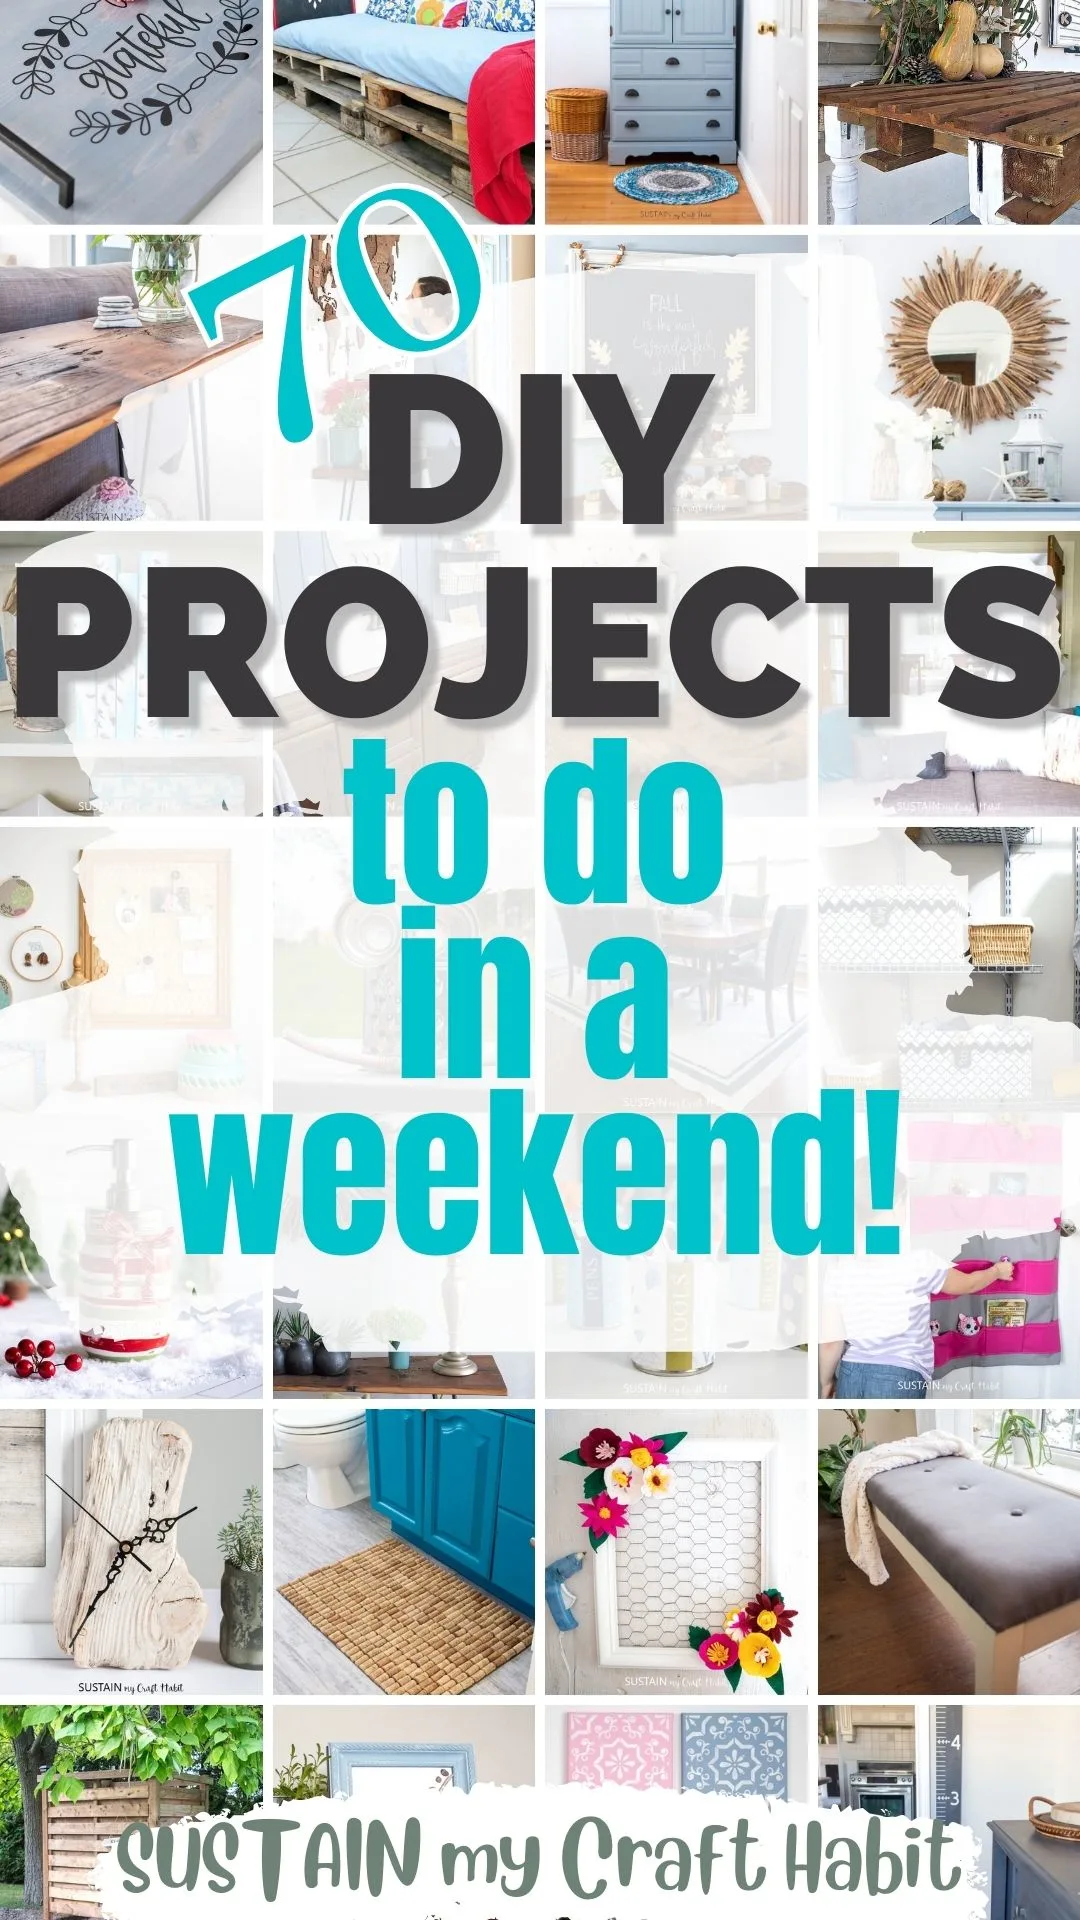 Collage of ideas for DIY projects that can be made in a weekend.